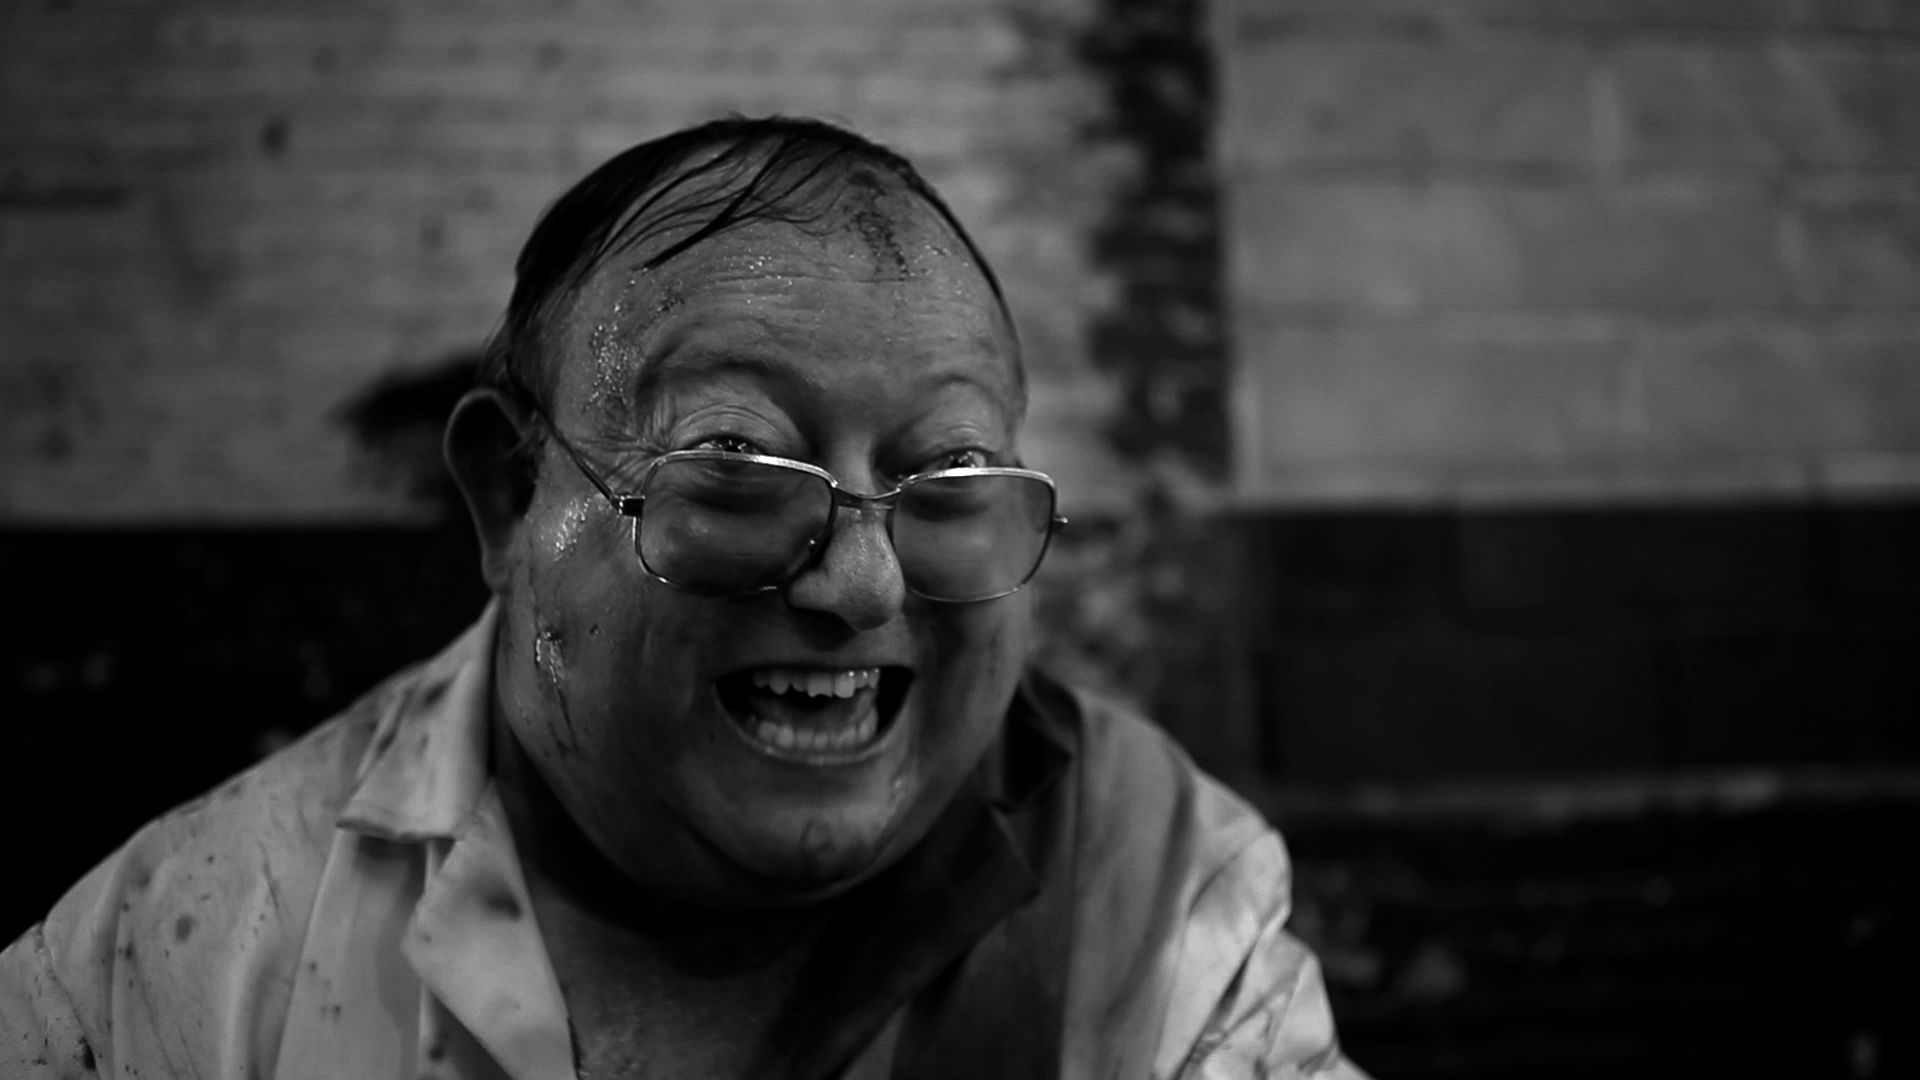 THE HUMAN CENTIPEDE 2 (FULL SEQUENCE) Review